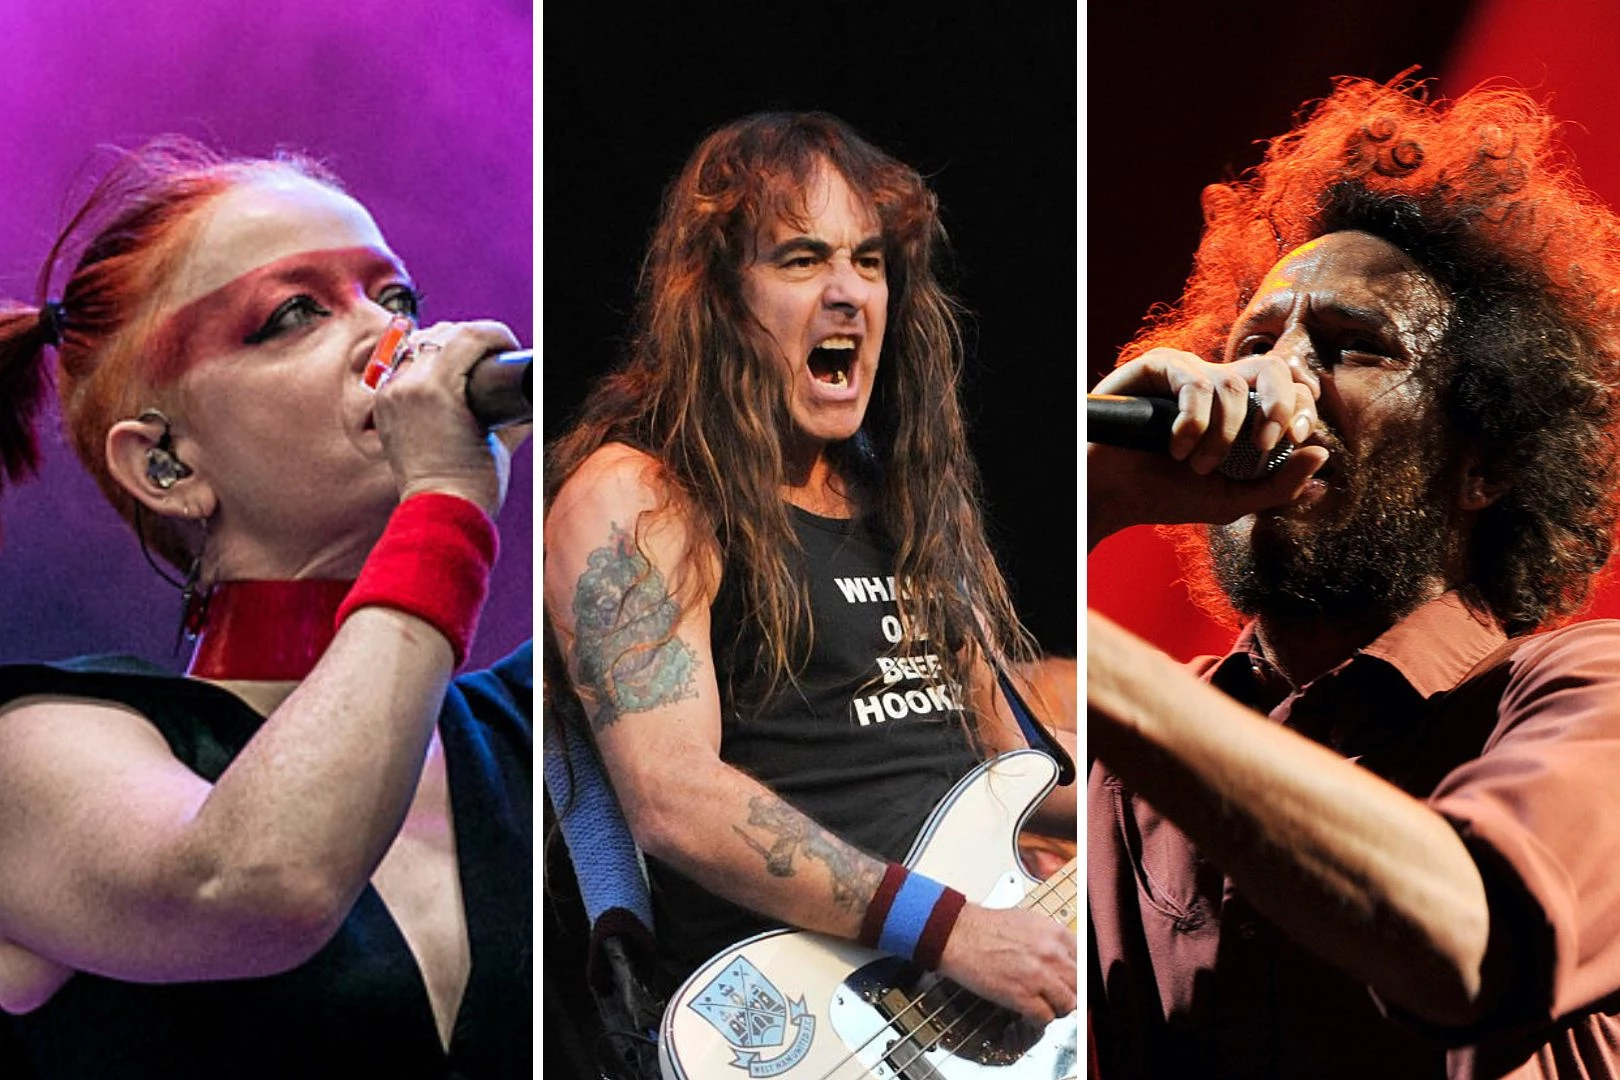 45 Acts Who Deserve To Be in the Rock and Roll Hall of Fame